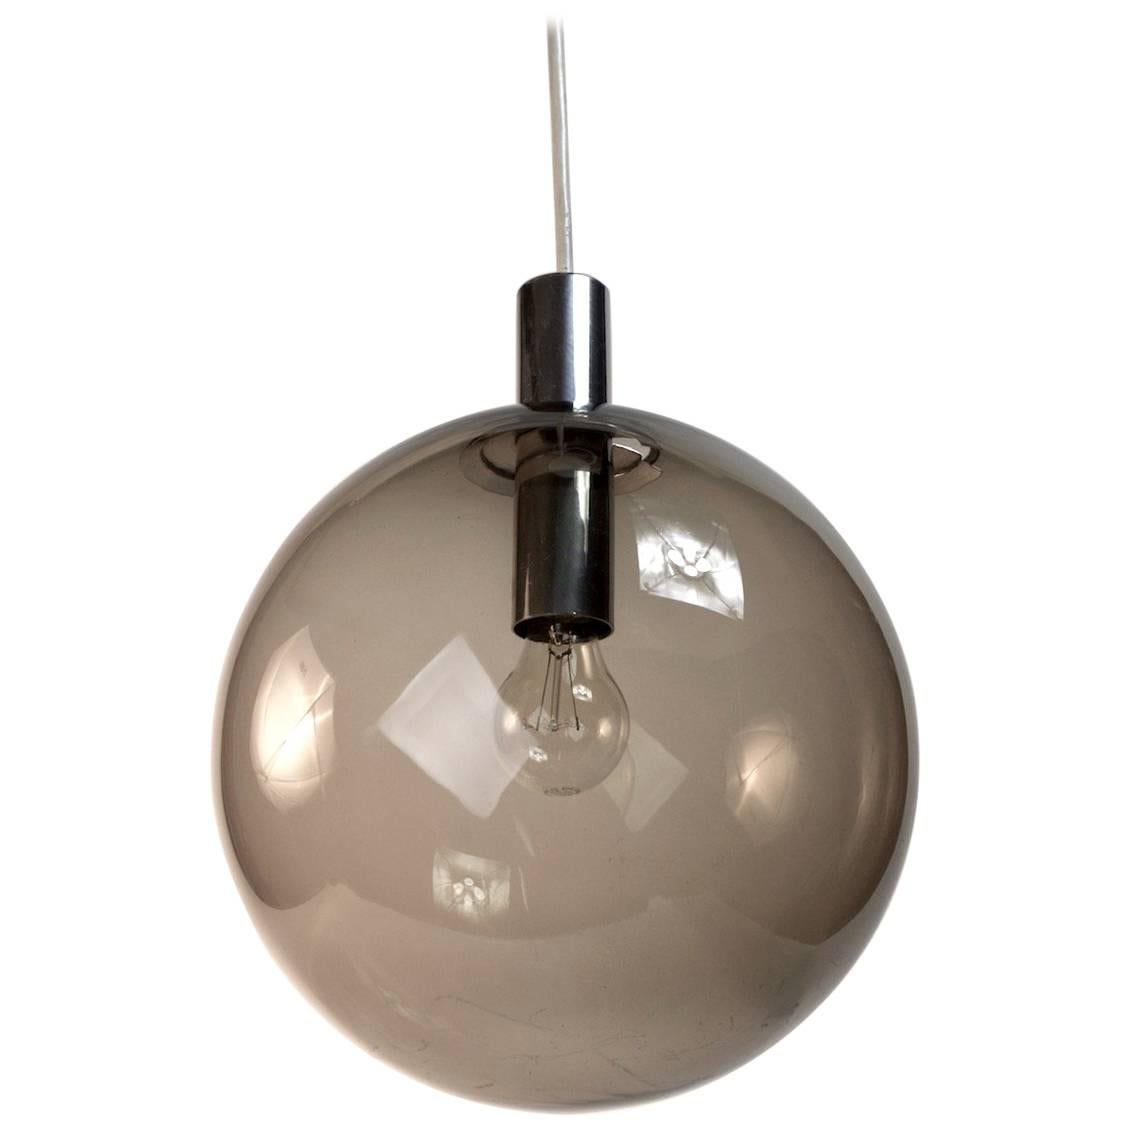 Smoked Glass Ball Fixture Attributed to Lightolier